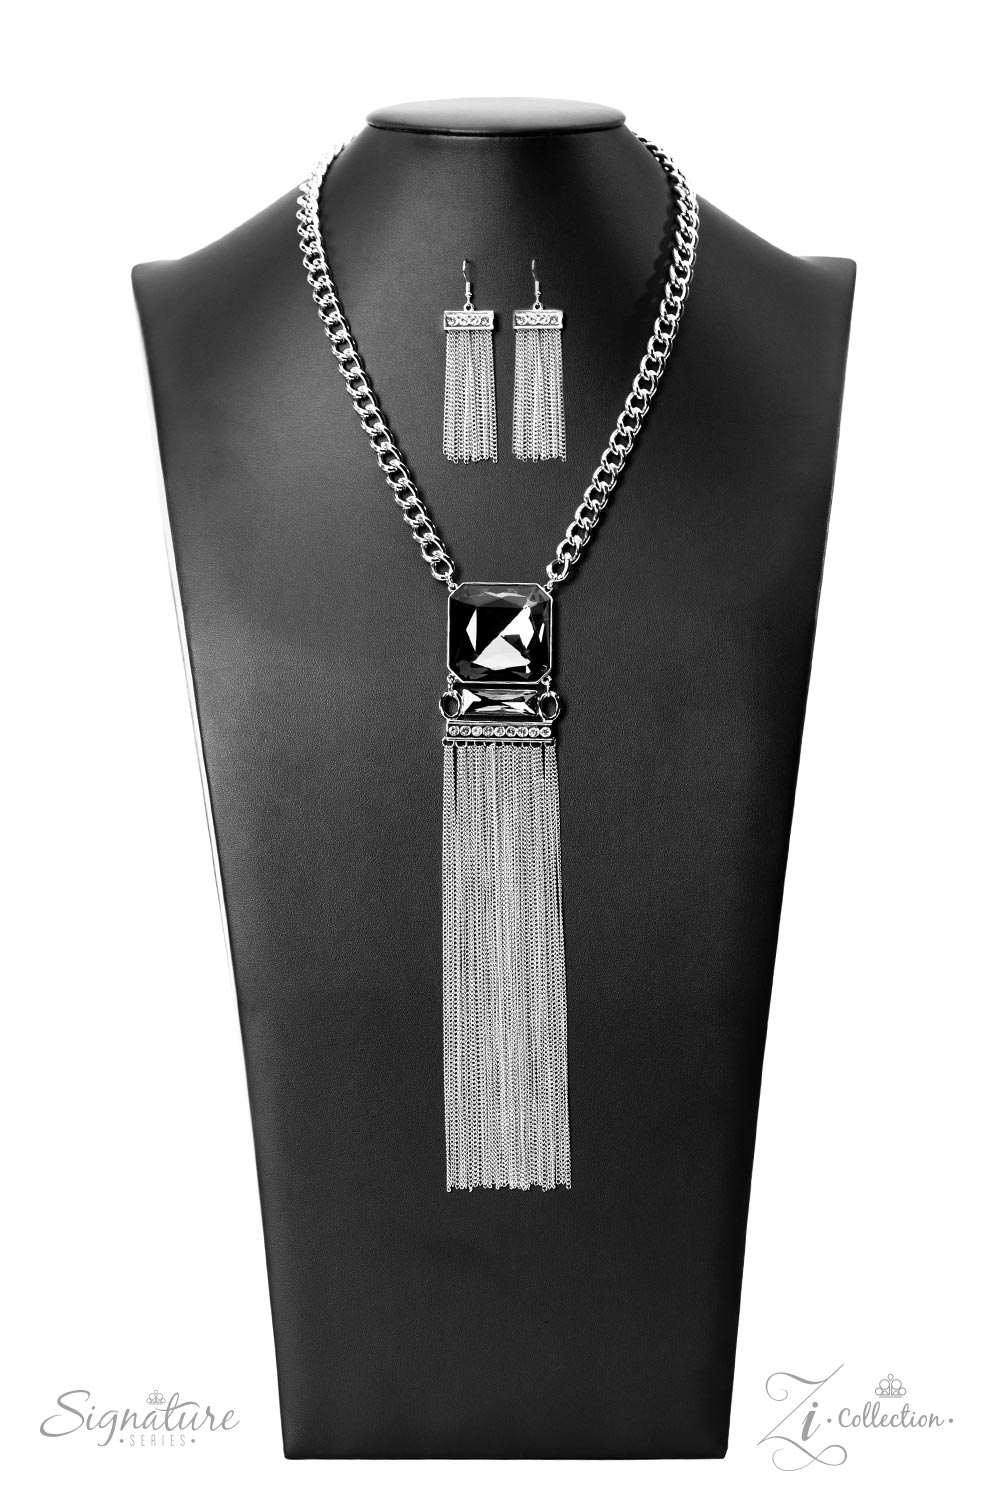 The Hope ZiCollection Necklace